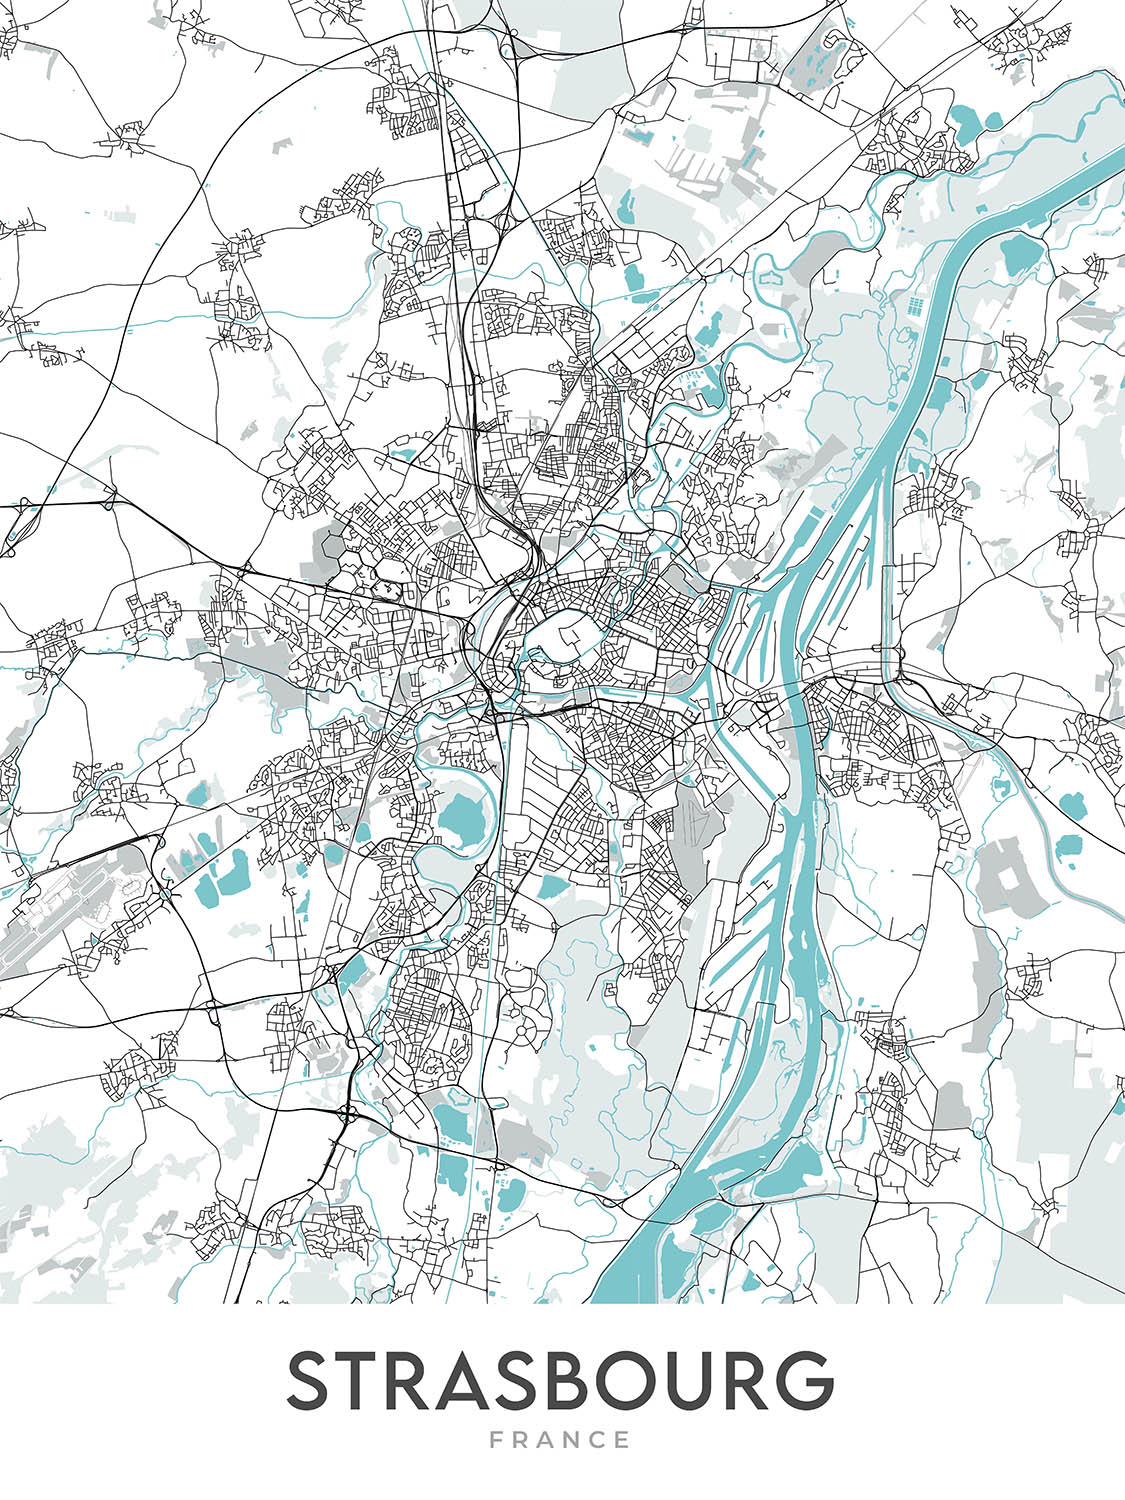 Modern City Map of Strasbourg, France: Cathedral, Rohan, Parc, Gare, A35